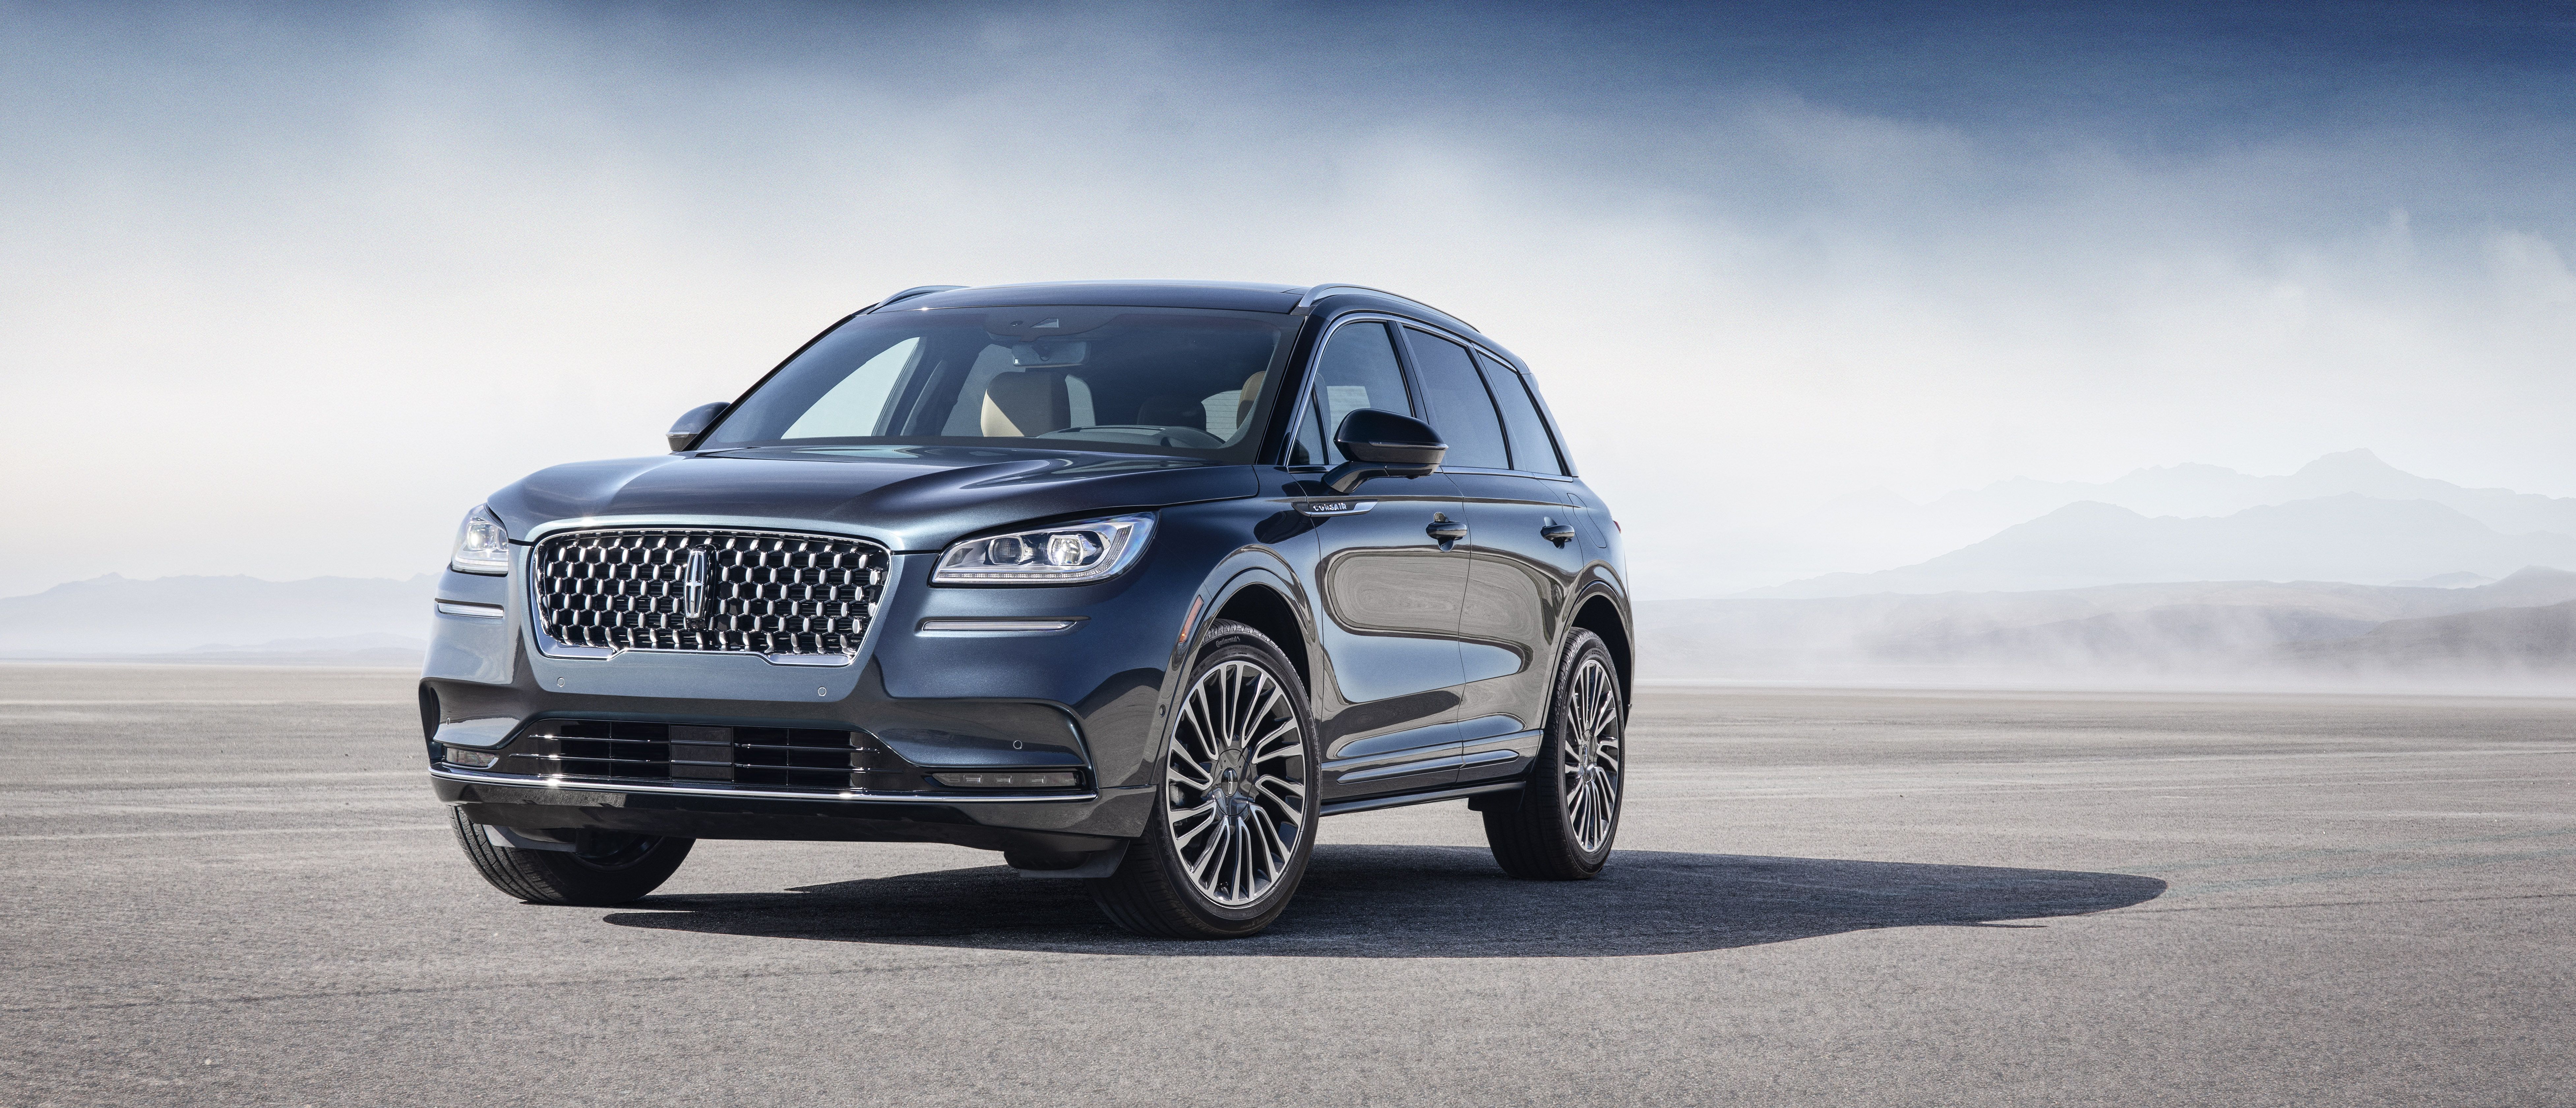 Wallpaper Of The Day: 2020 Lincoln Corsair Picture, Photo, Wallpaper